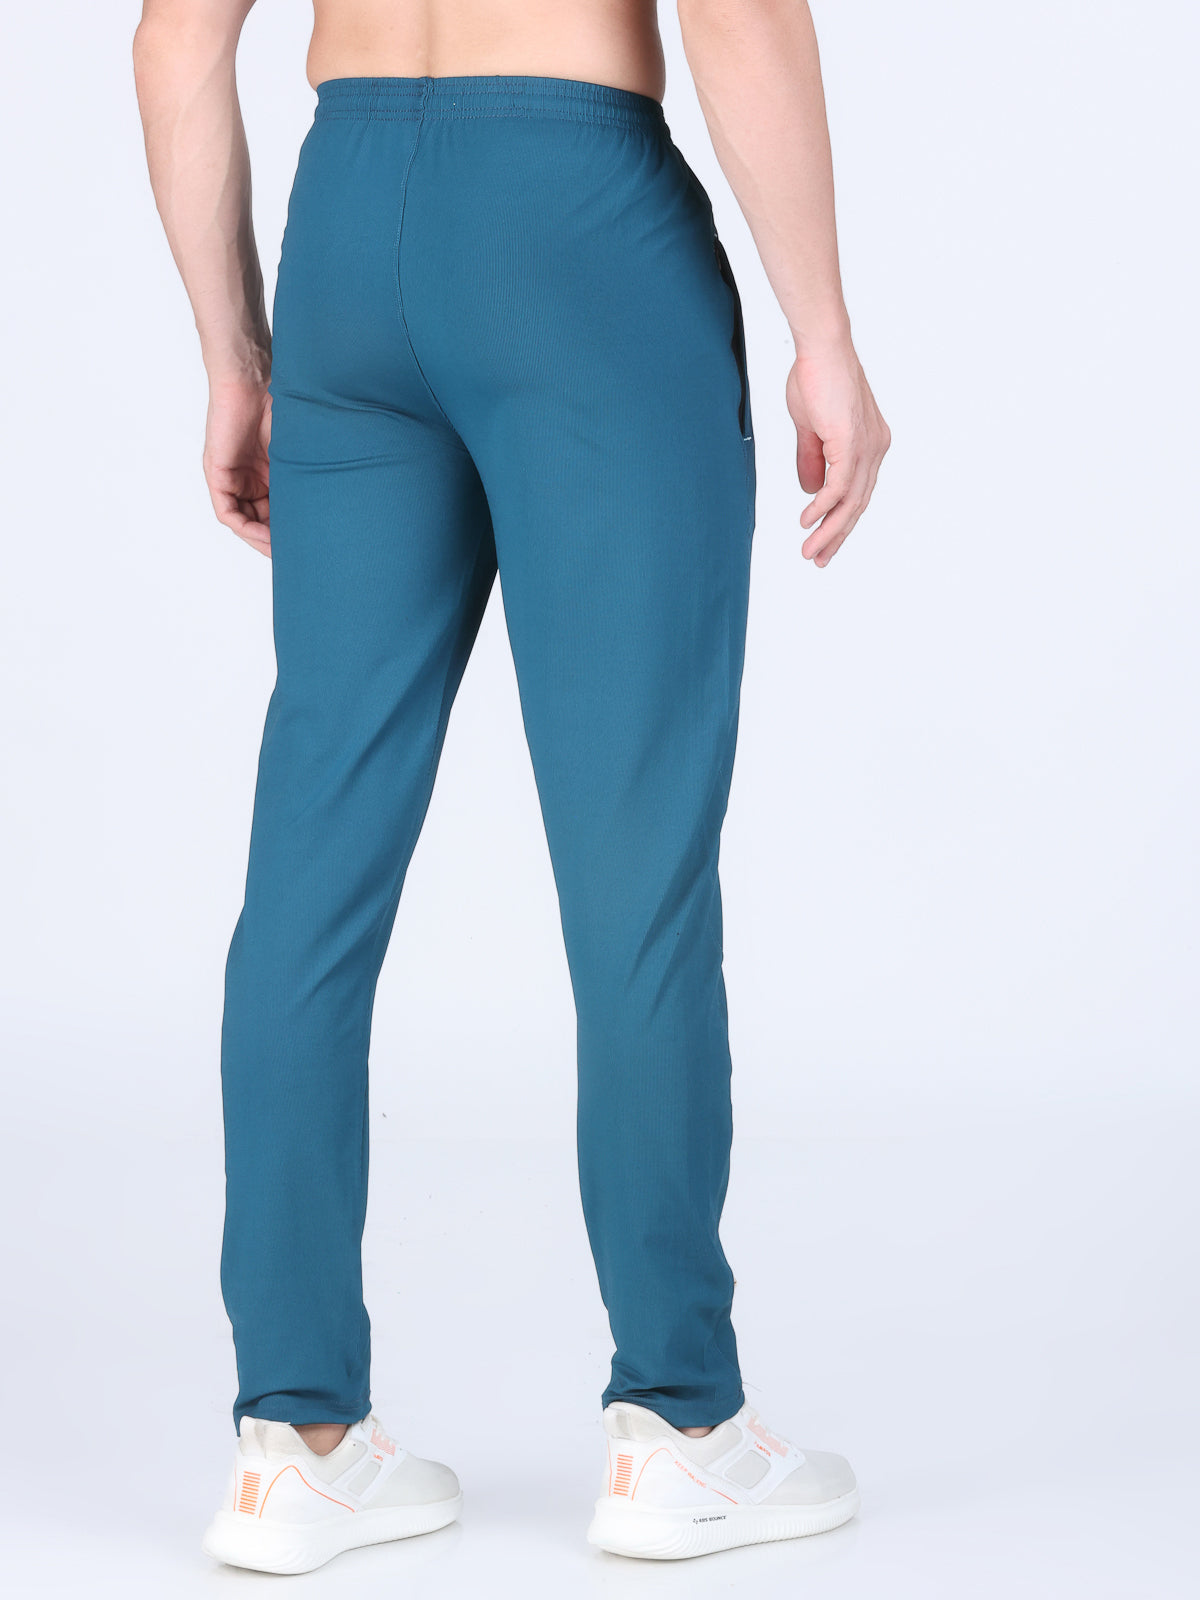 Combo of 2 Men's 4 Way Stretch Lining Pista and Turquoise Track Pant